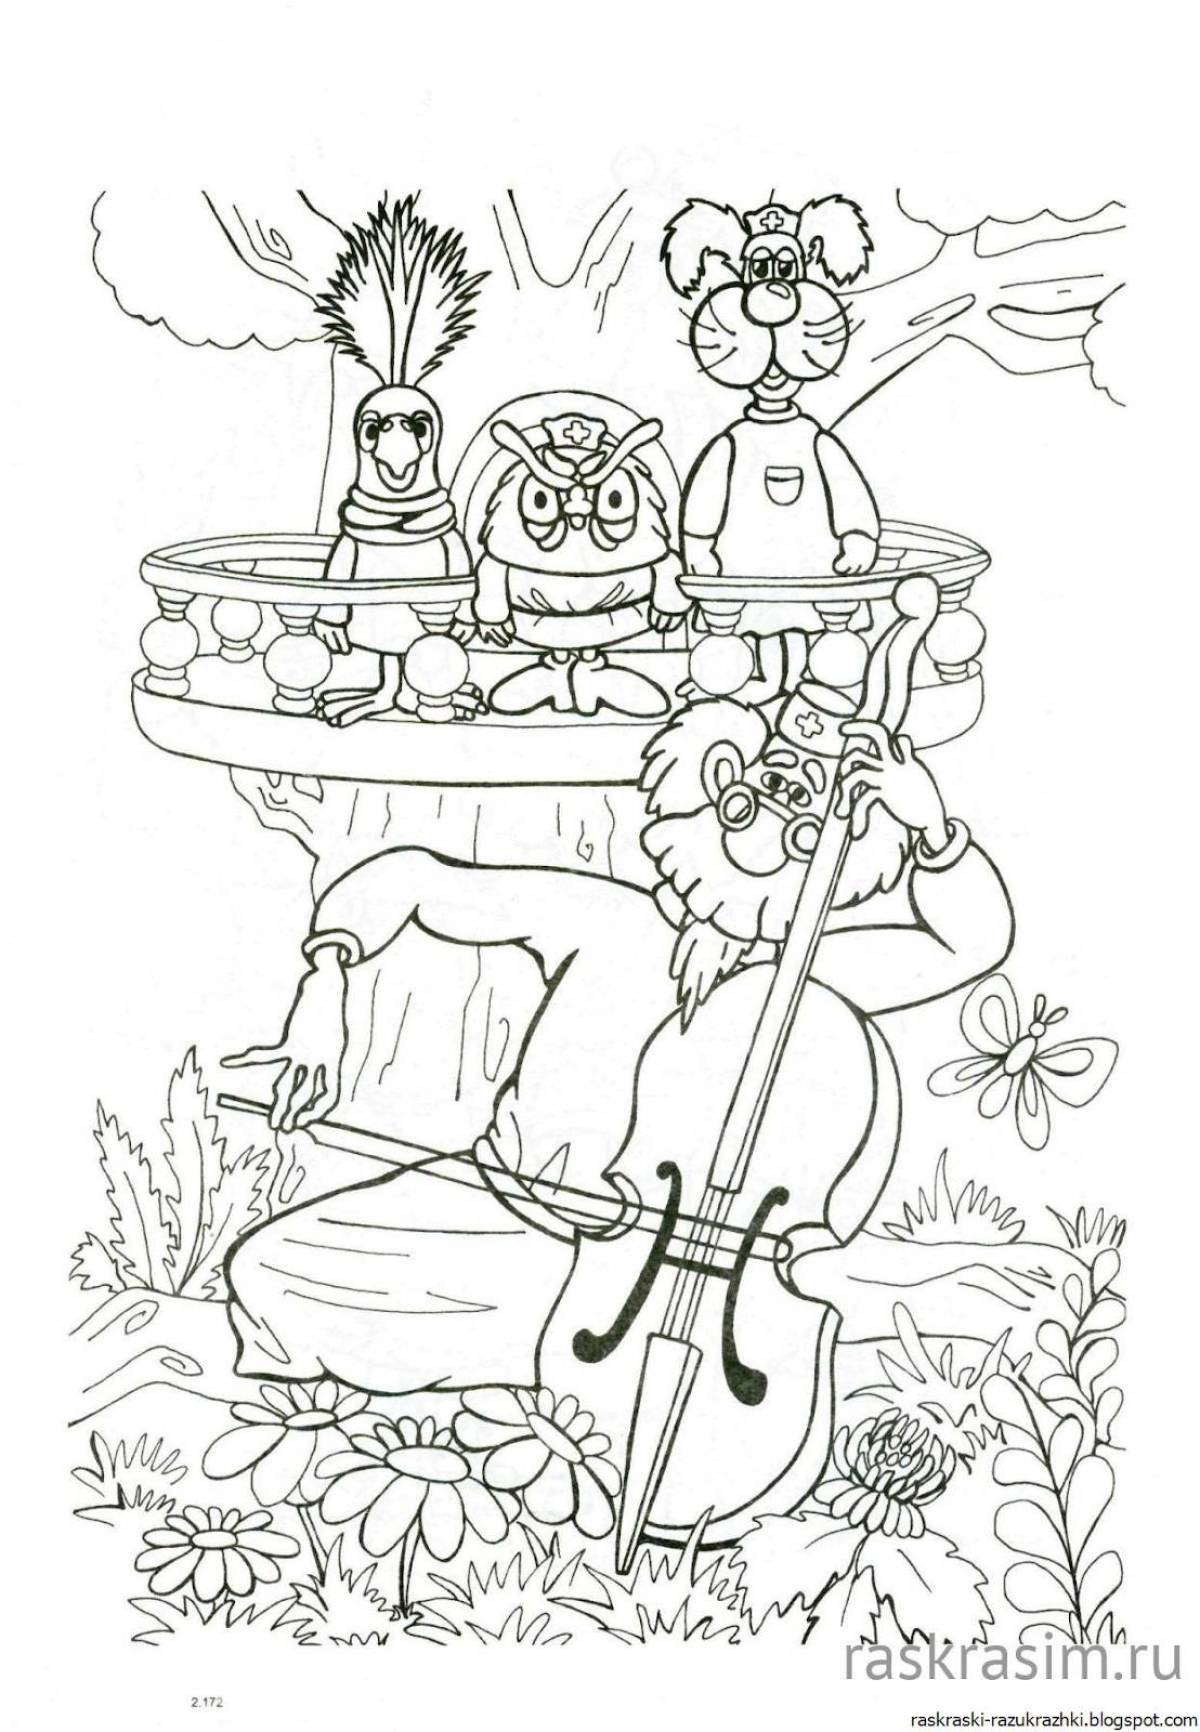 Dr. Aibolit's involvement coloring page